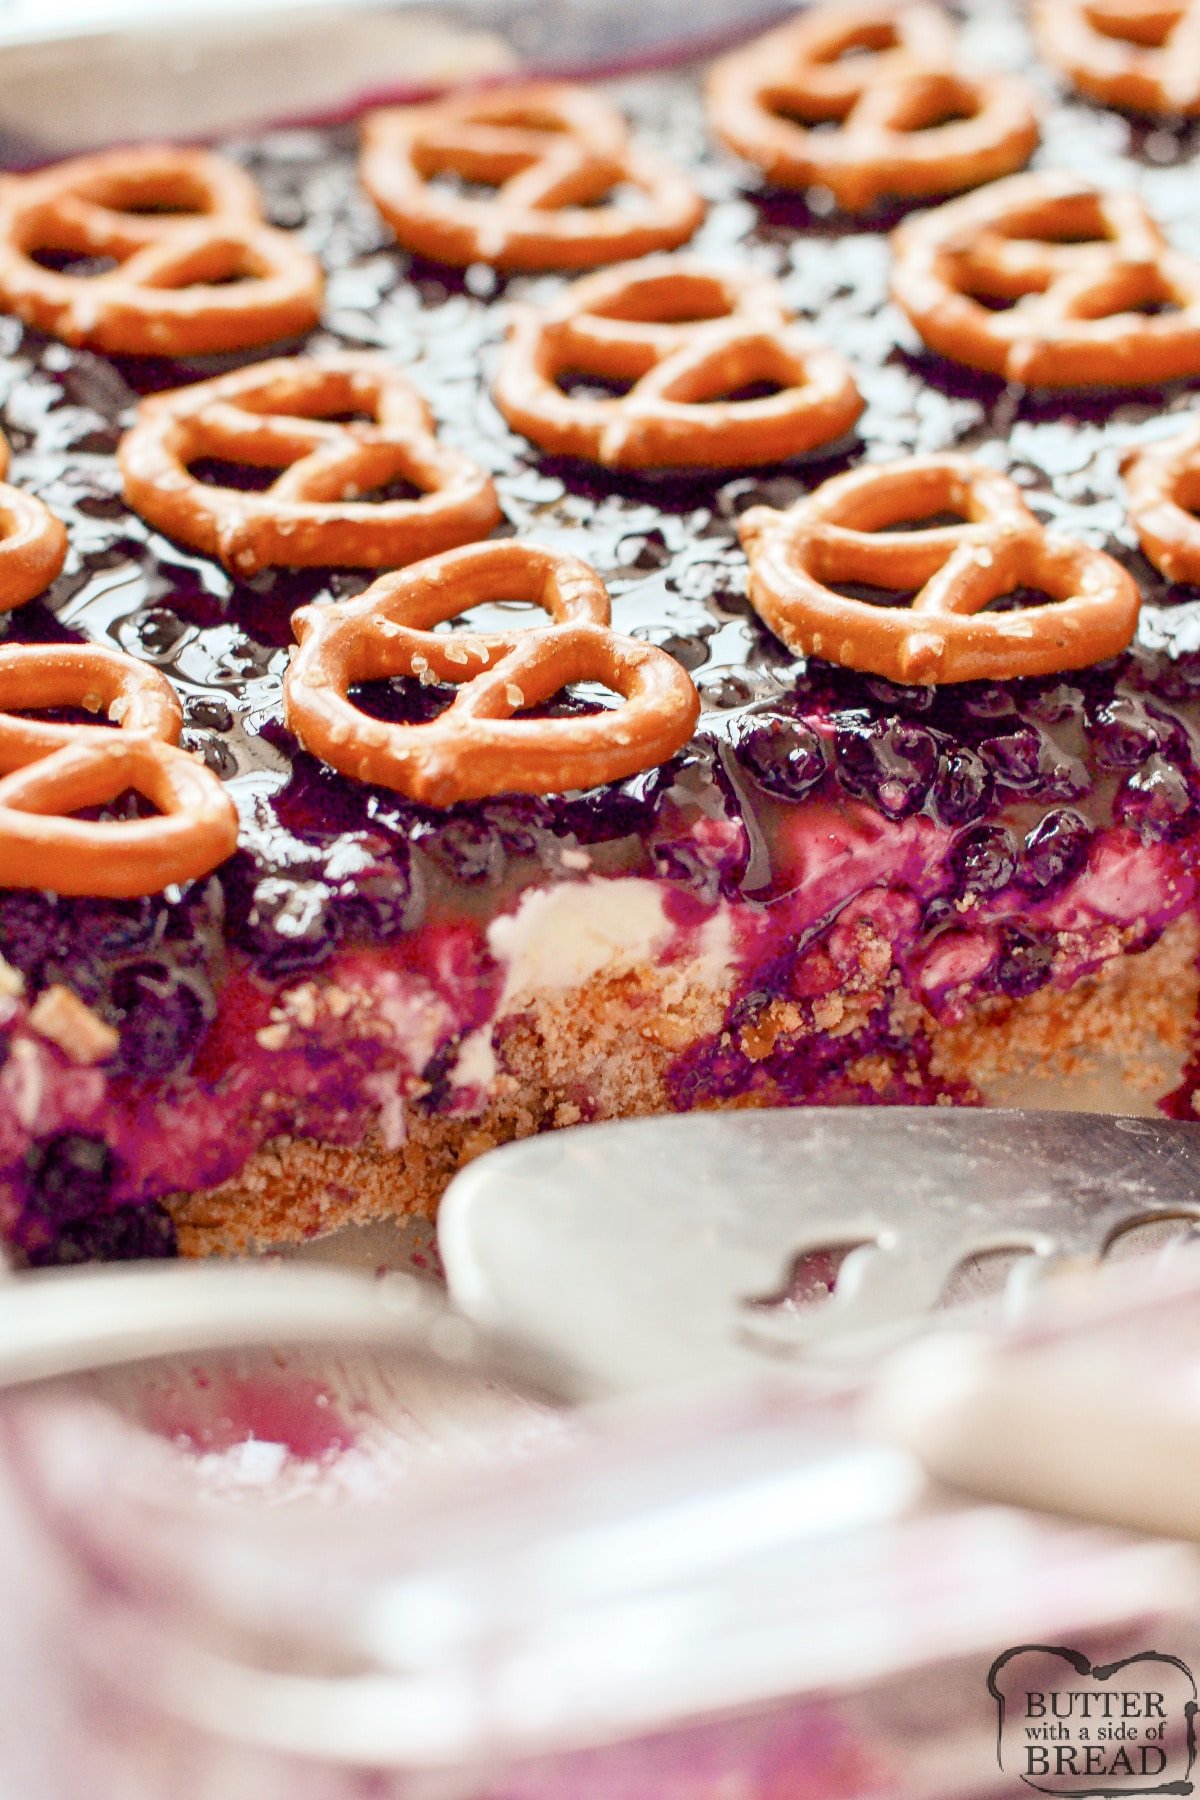 Dessert with pretzel crust, cream layer, and blueberry filling.